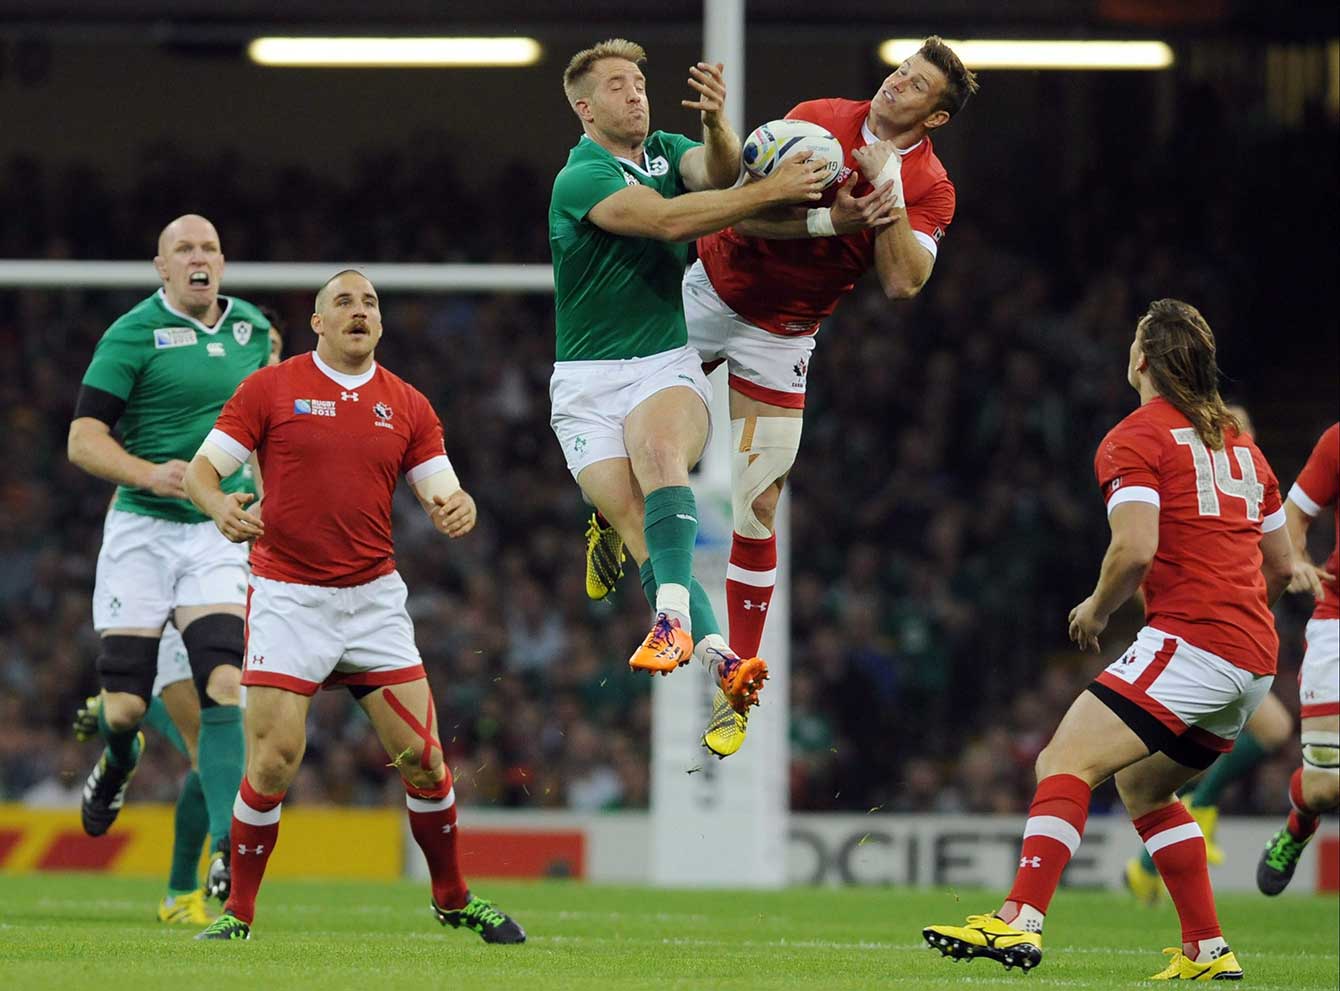 Ireland's Luke Fitzgerald, centre left, and Canada's Matt Evans compete for the ball during their Rugby World Cup Pool D match at the Millennium Stadium, Cardiff, Wales, Saturday Sept. 19, 2015. (AP Photo/Rui Vieira)